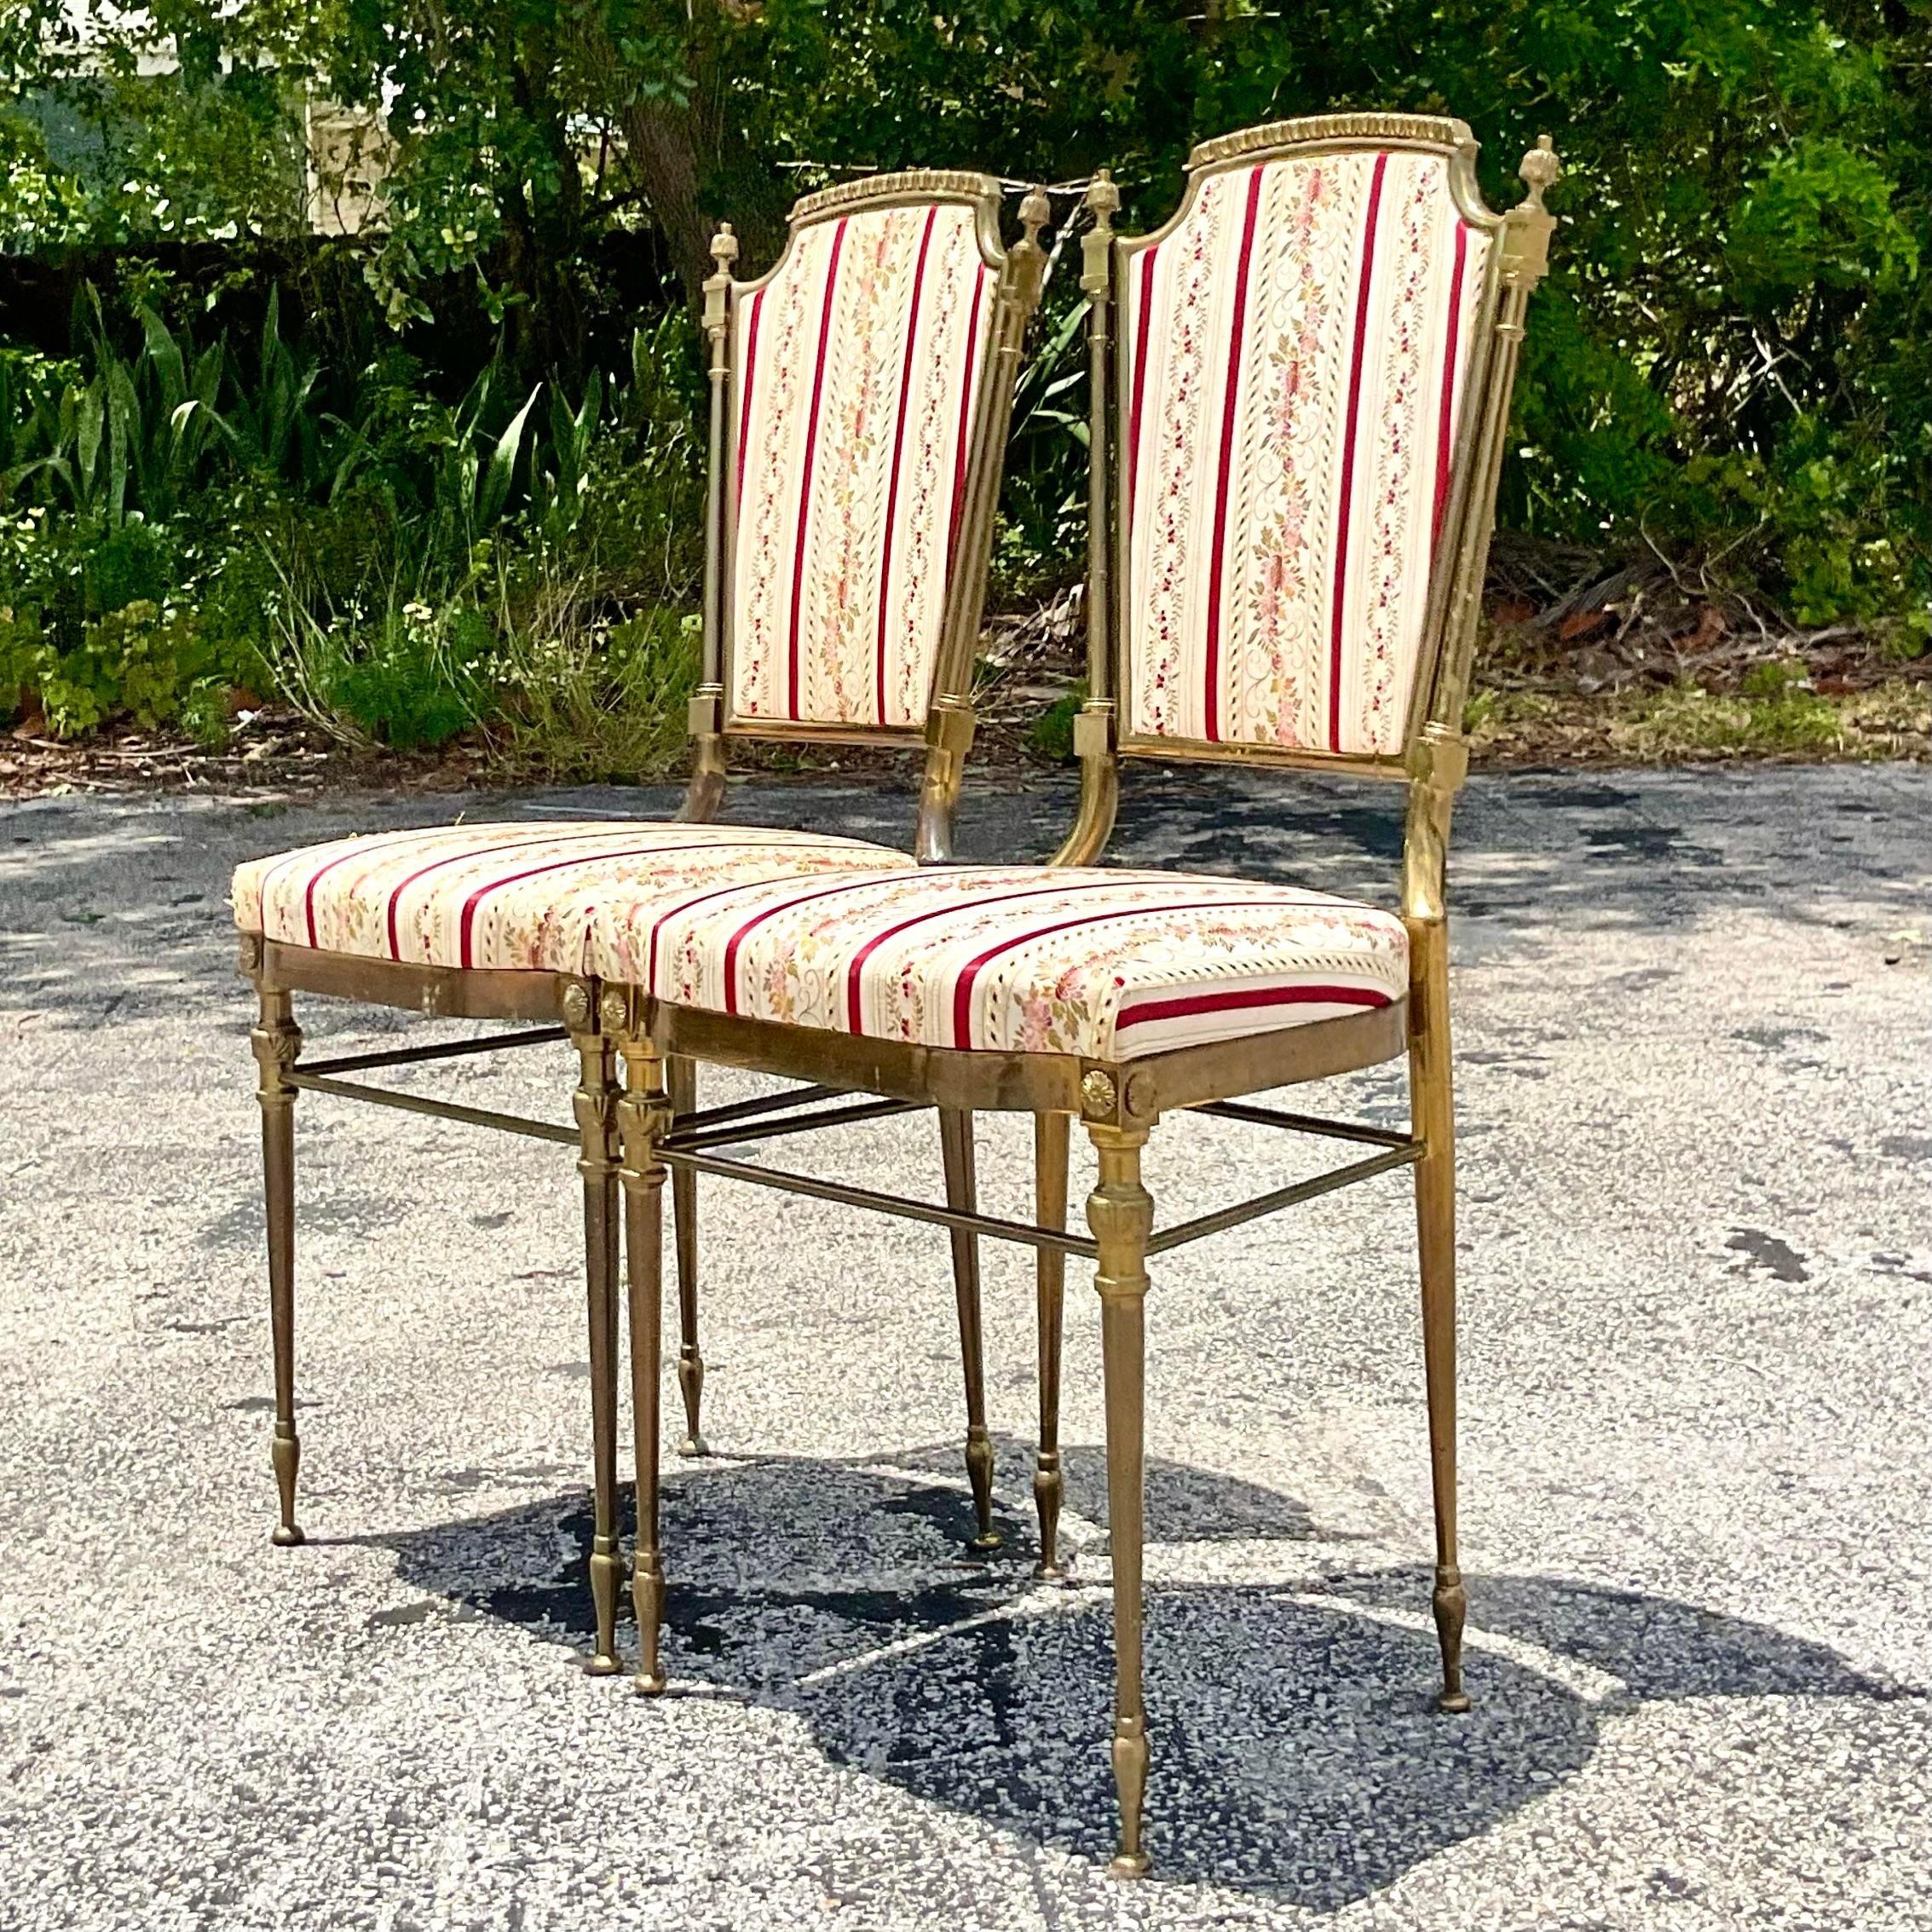 Add a touch of European elegance to your space with our Vintage Italian Brass Charvari Chairs - A Pair. Imported and cherished in American homes, these chairs combine Italian craftsmanship with classic American sophistication, offering timeless